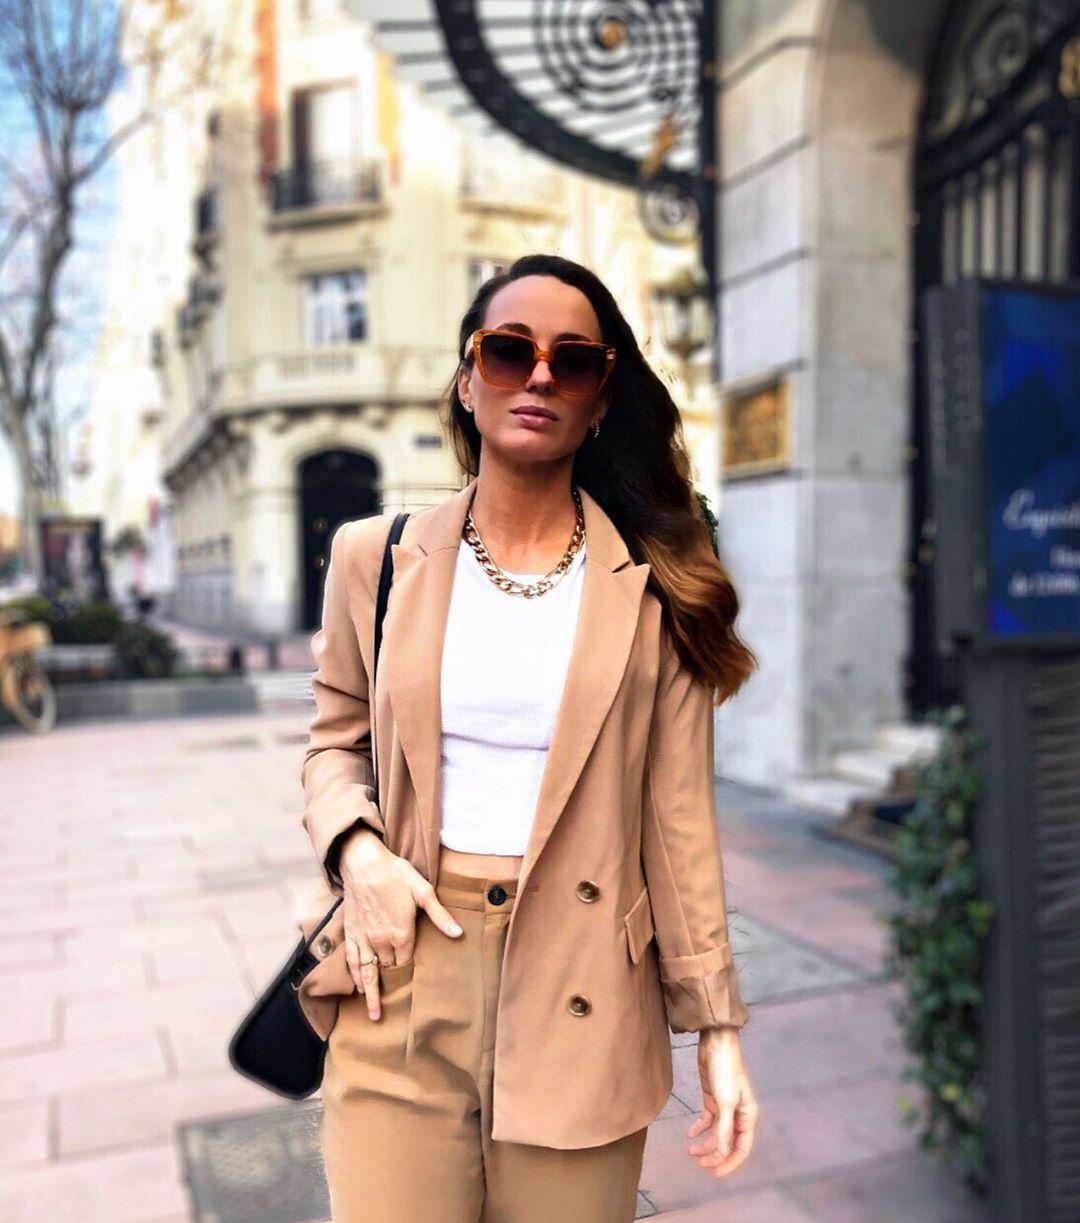 51 Hot Pictures Of Kosovare Asllani Are Simply Excessively Damn Delectable 6